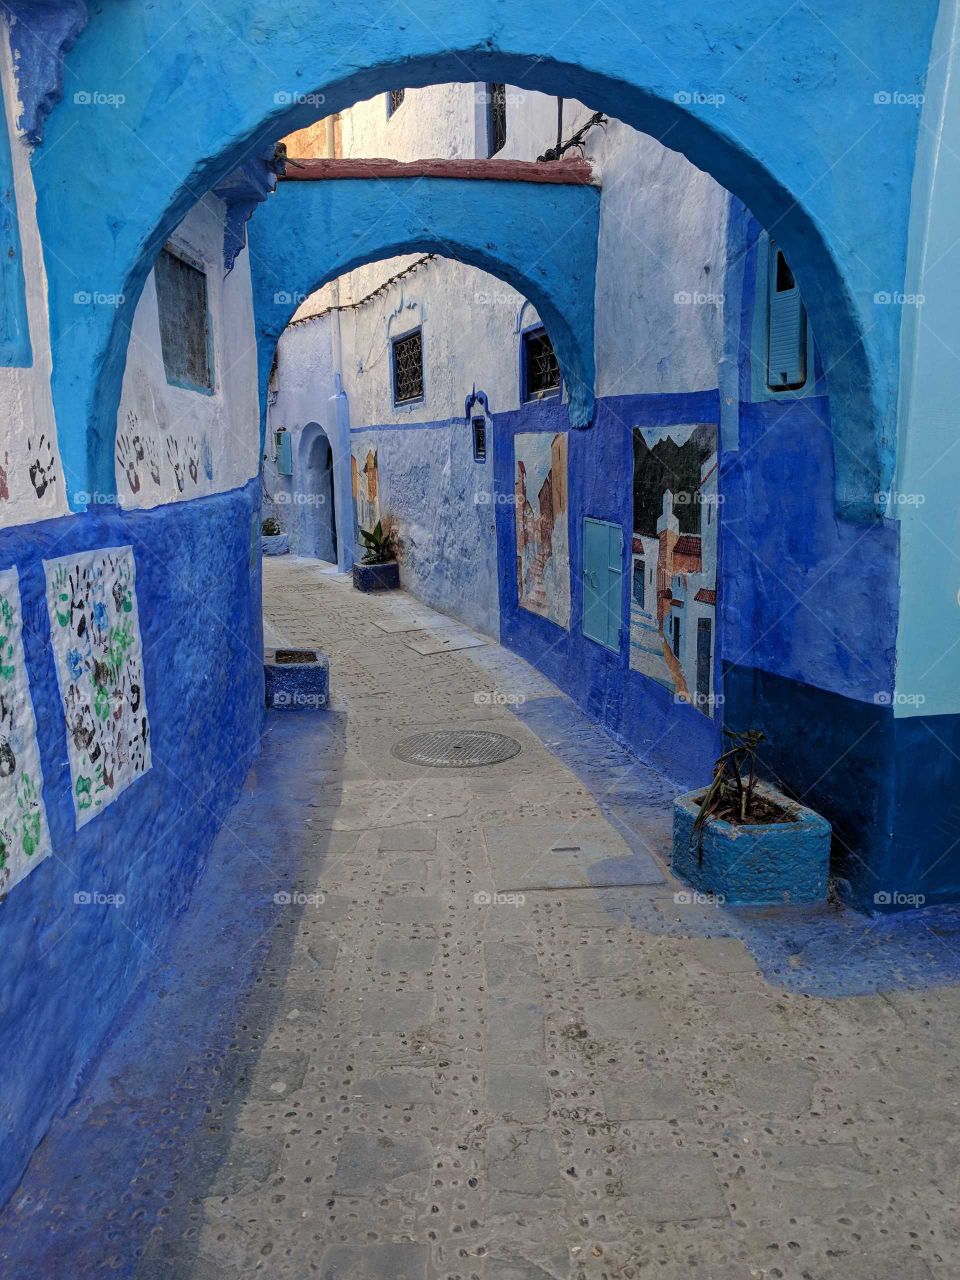 Blue Street/Alley in Chefchaouen (The Blue City), Morocco - An Arch with Lots of Art Lining the Walls